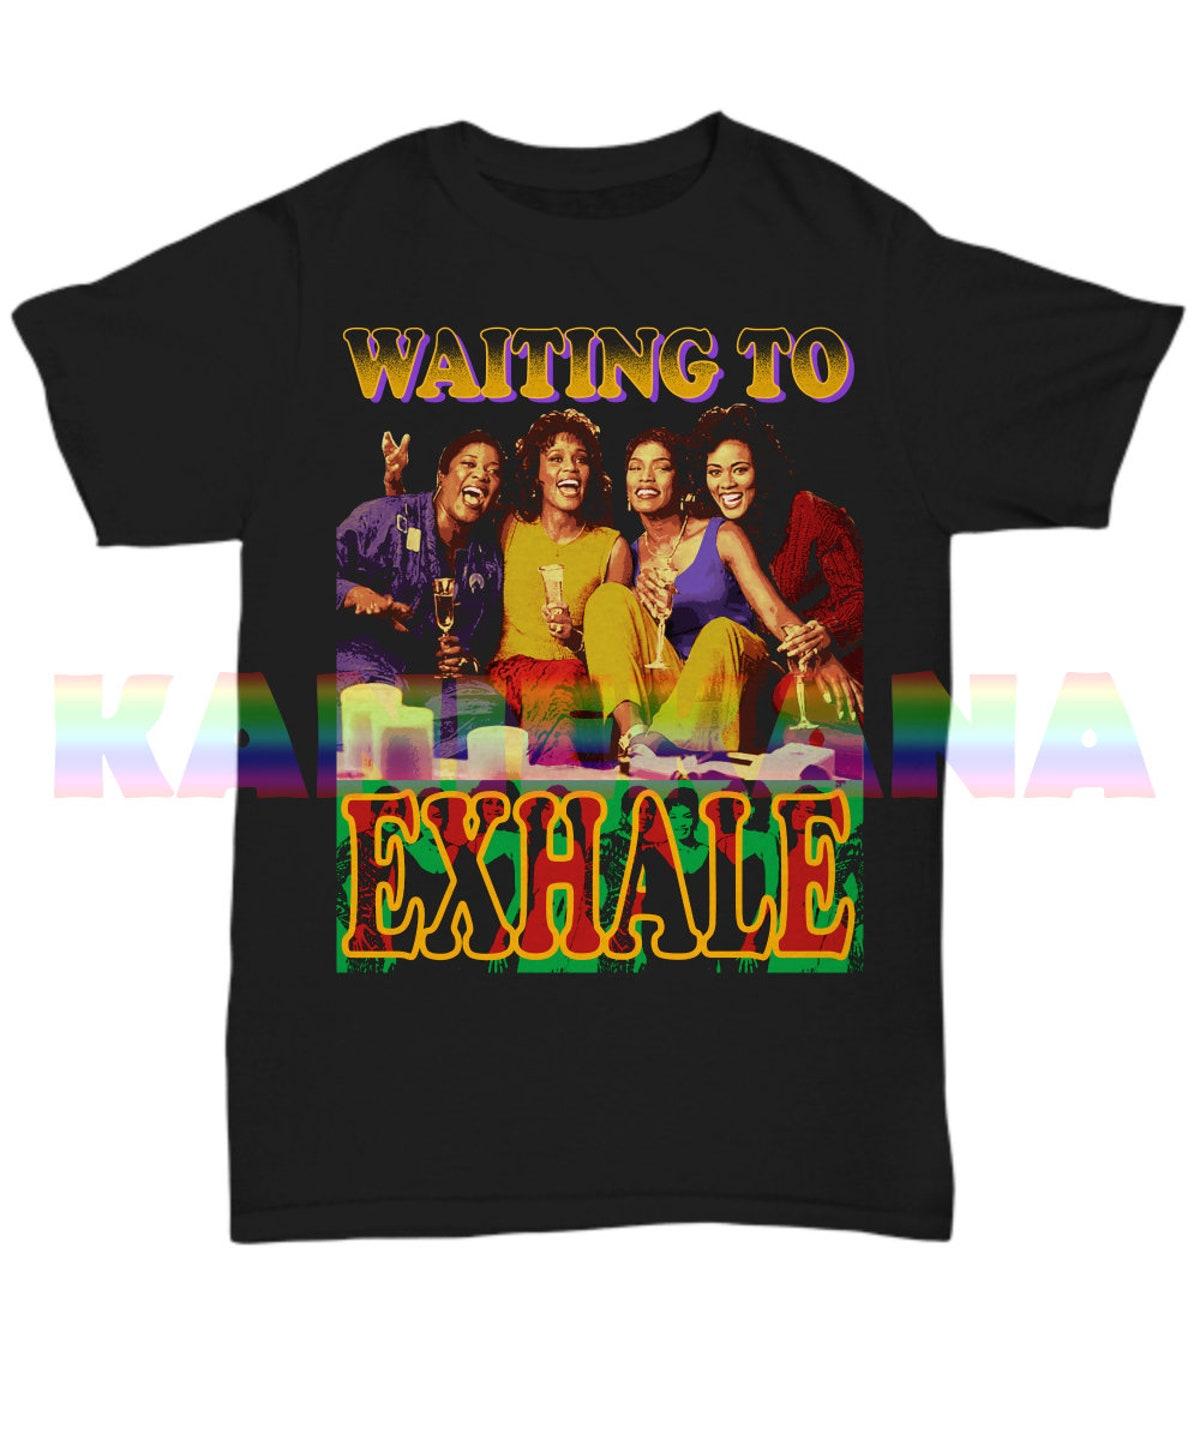 90s Retro Style Romance Film Waiting To Exhale Shirt Gift For Fans